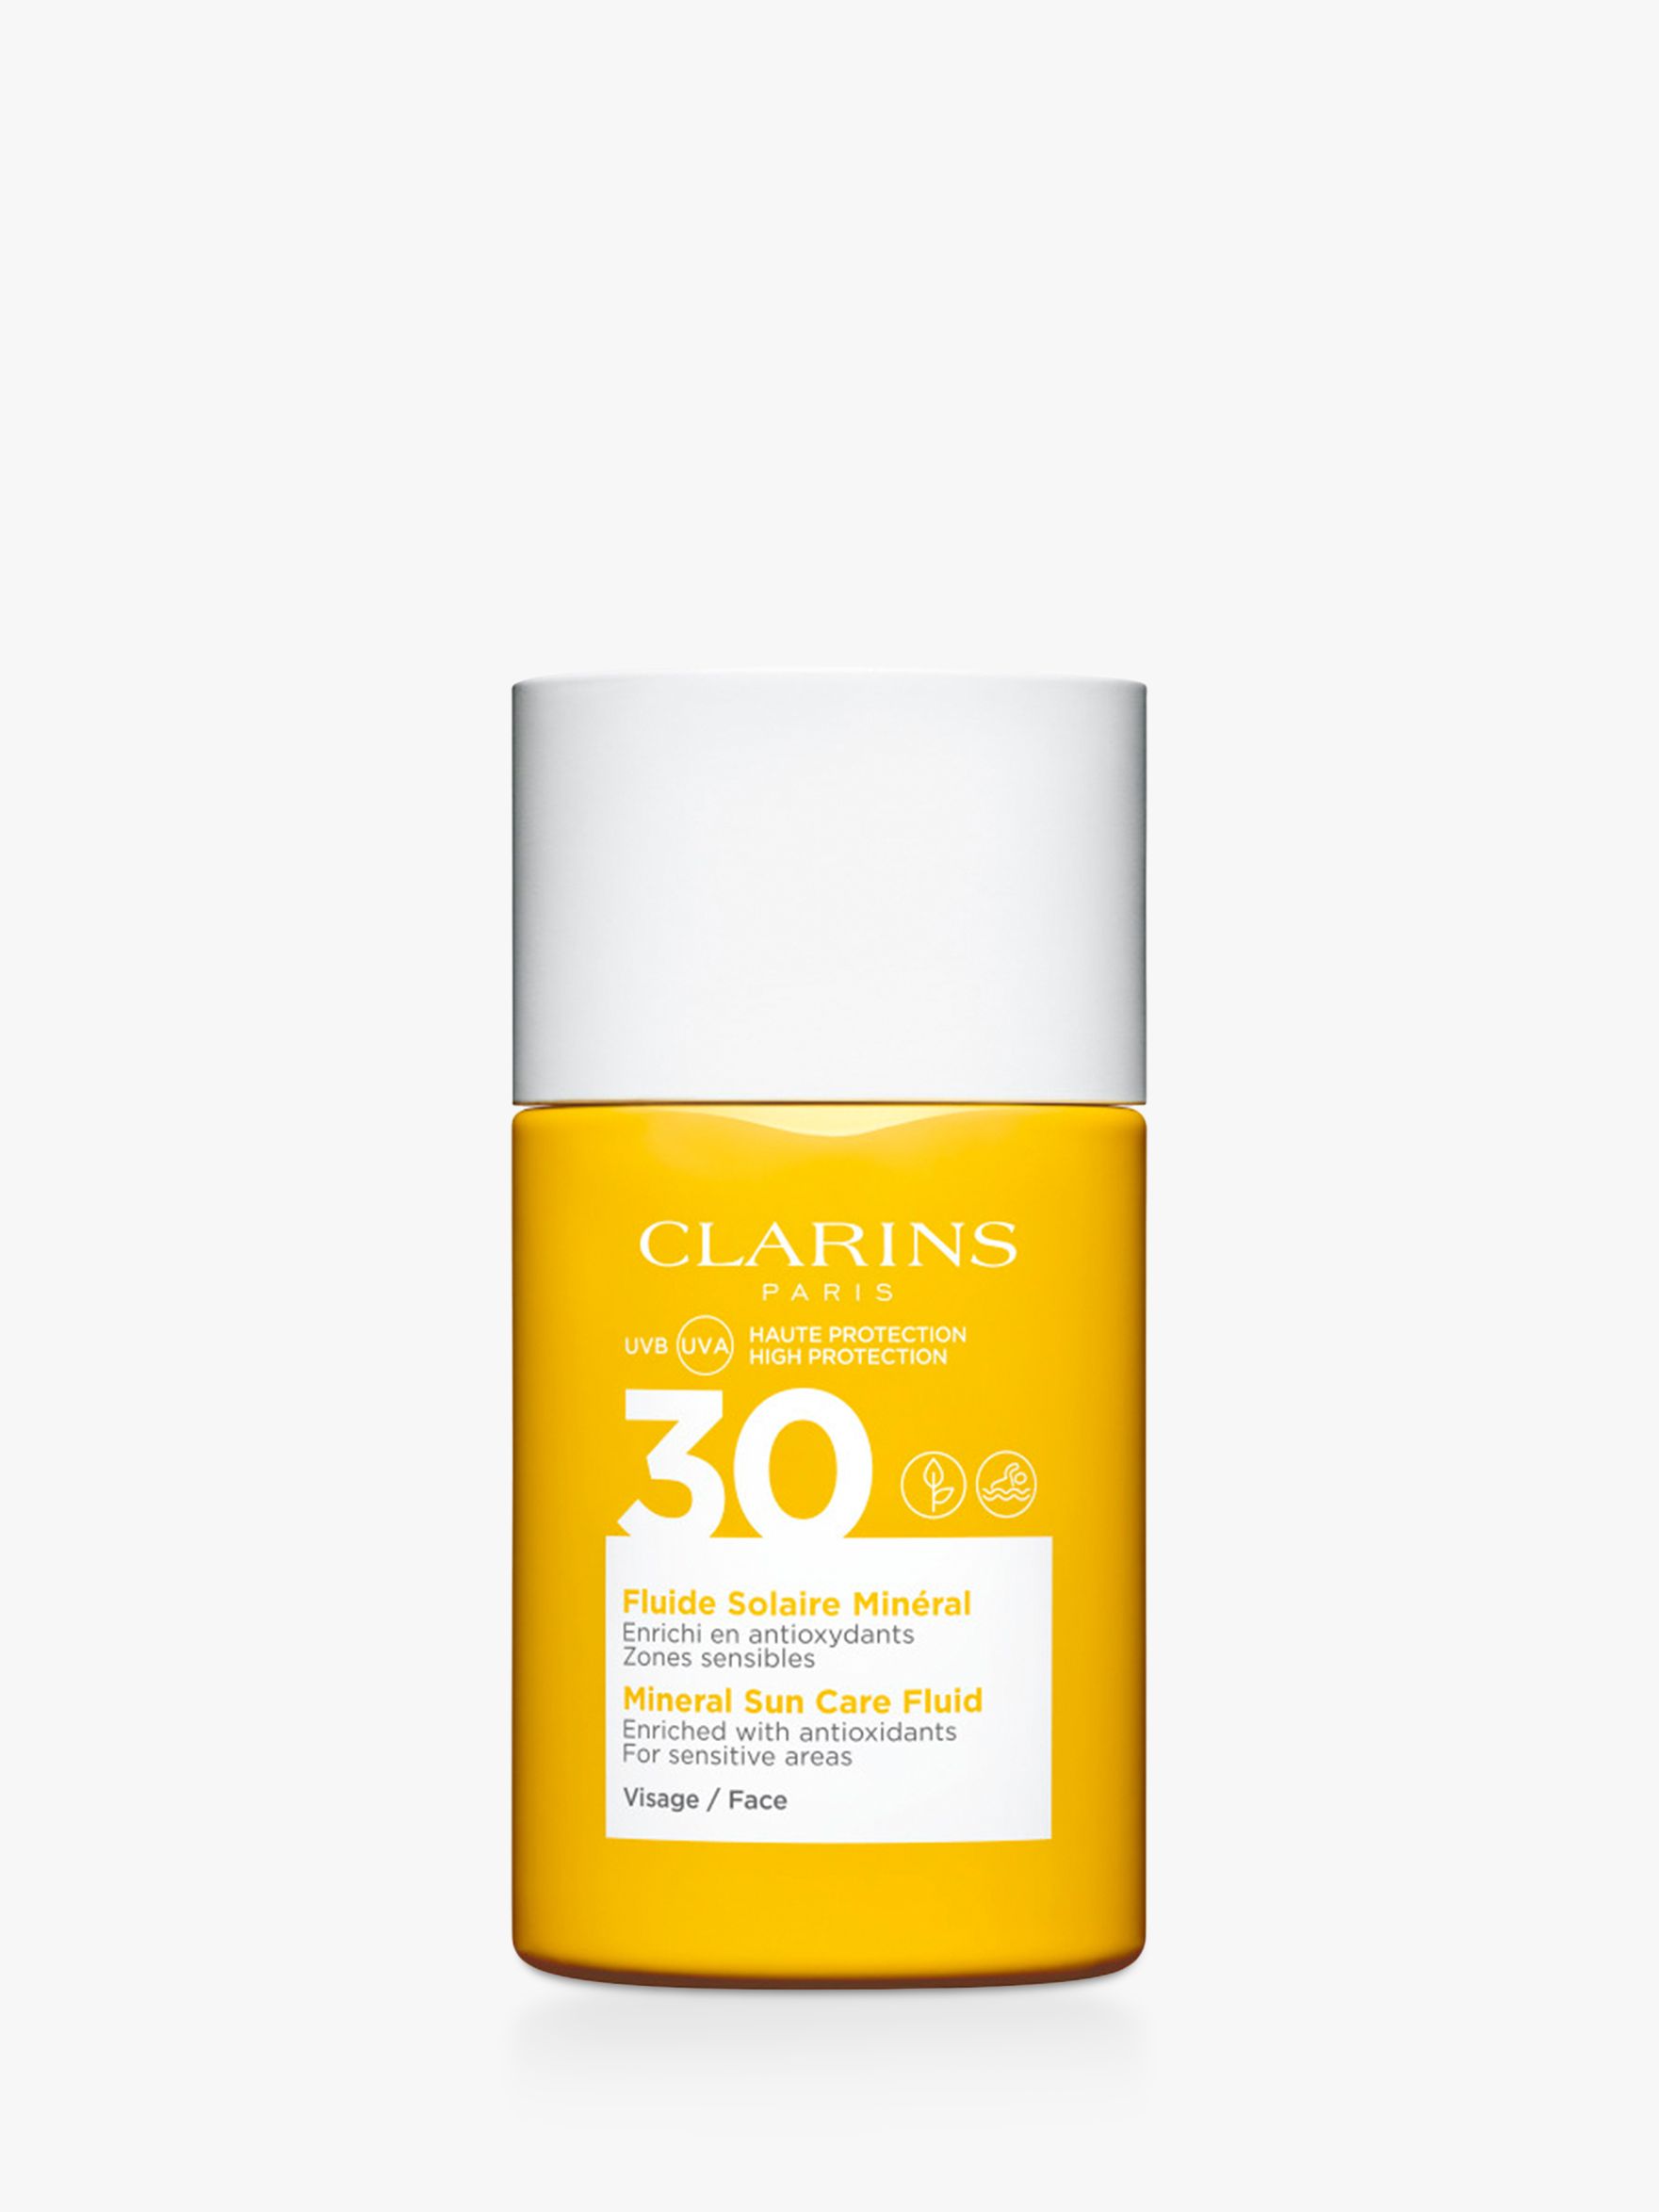 Clarins Mineral Sun Care Fluid Face SPF 30, 30ml at John Lewis & Partners